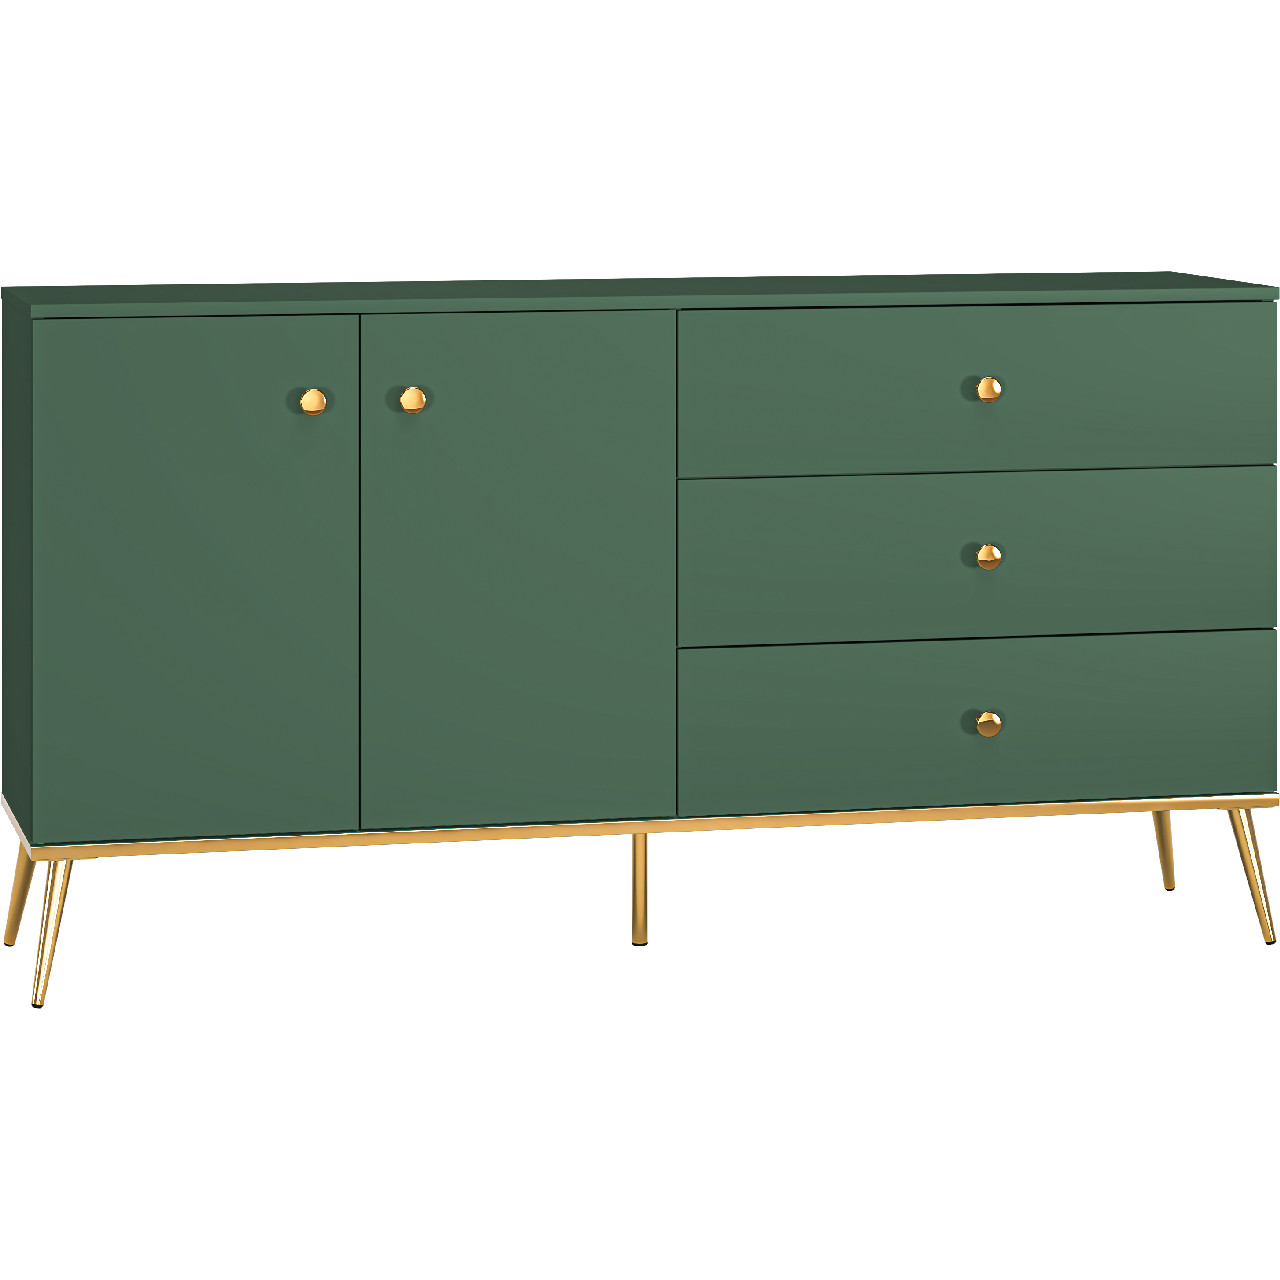 Chest of Drawers SOLER 03 green